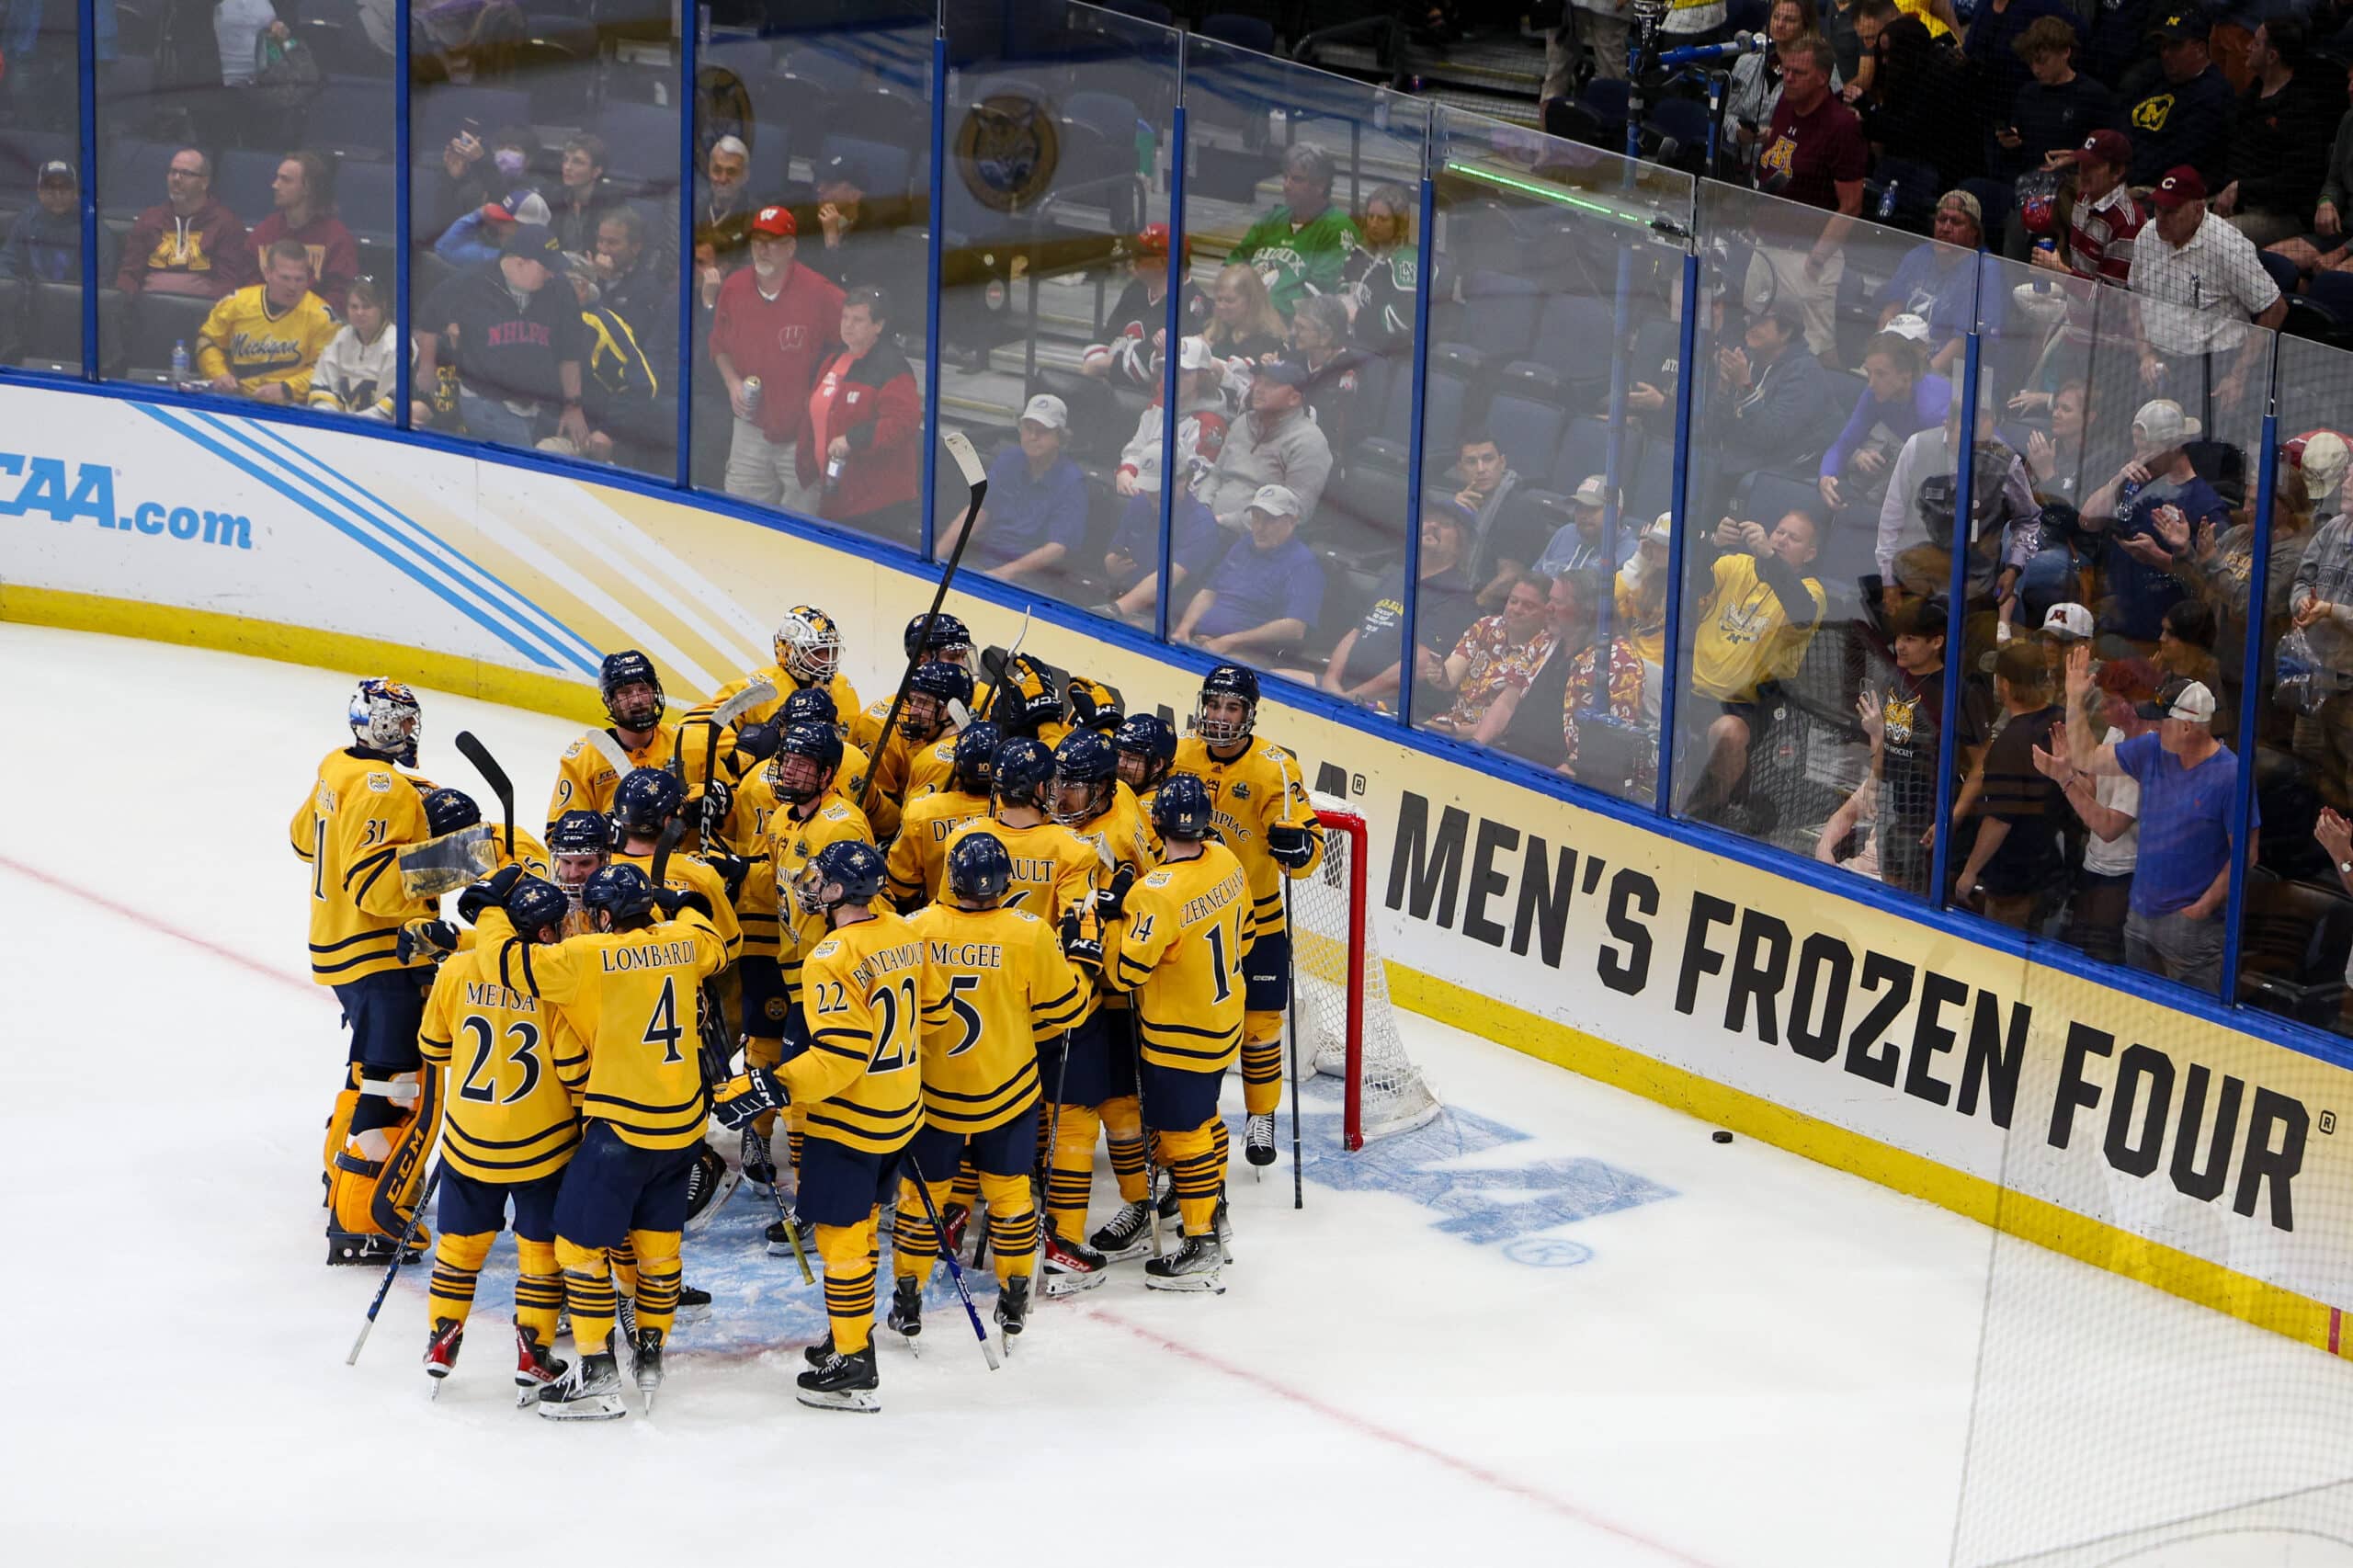 Apr 6, 2023; Tampa, Florida, USA; Quinnipiac celebrates after beating Michigan in the semifinals of the 2023 Frozen Four college ice hockey tournament at Amalie Arena.